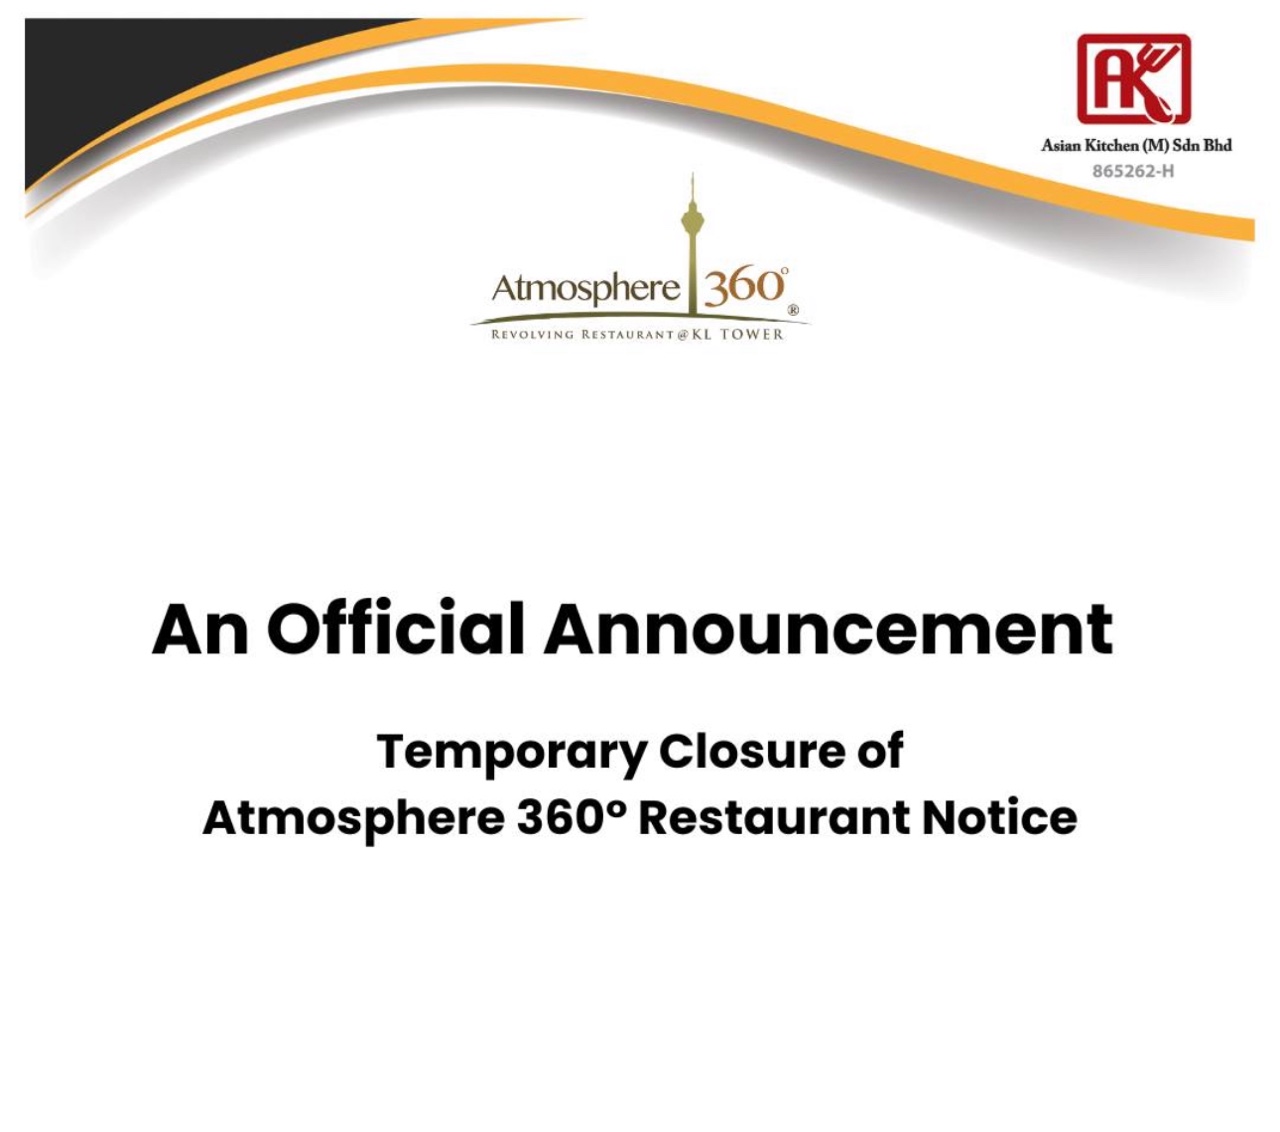 Official announcement by atmosphere 360 closing